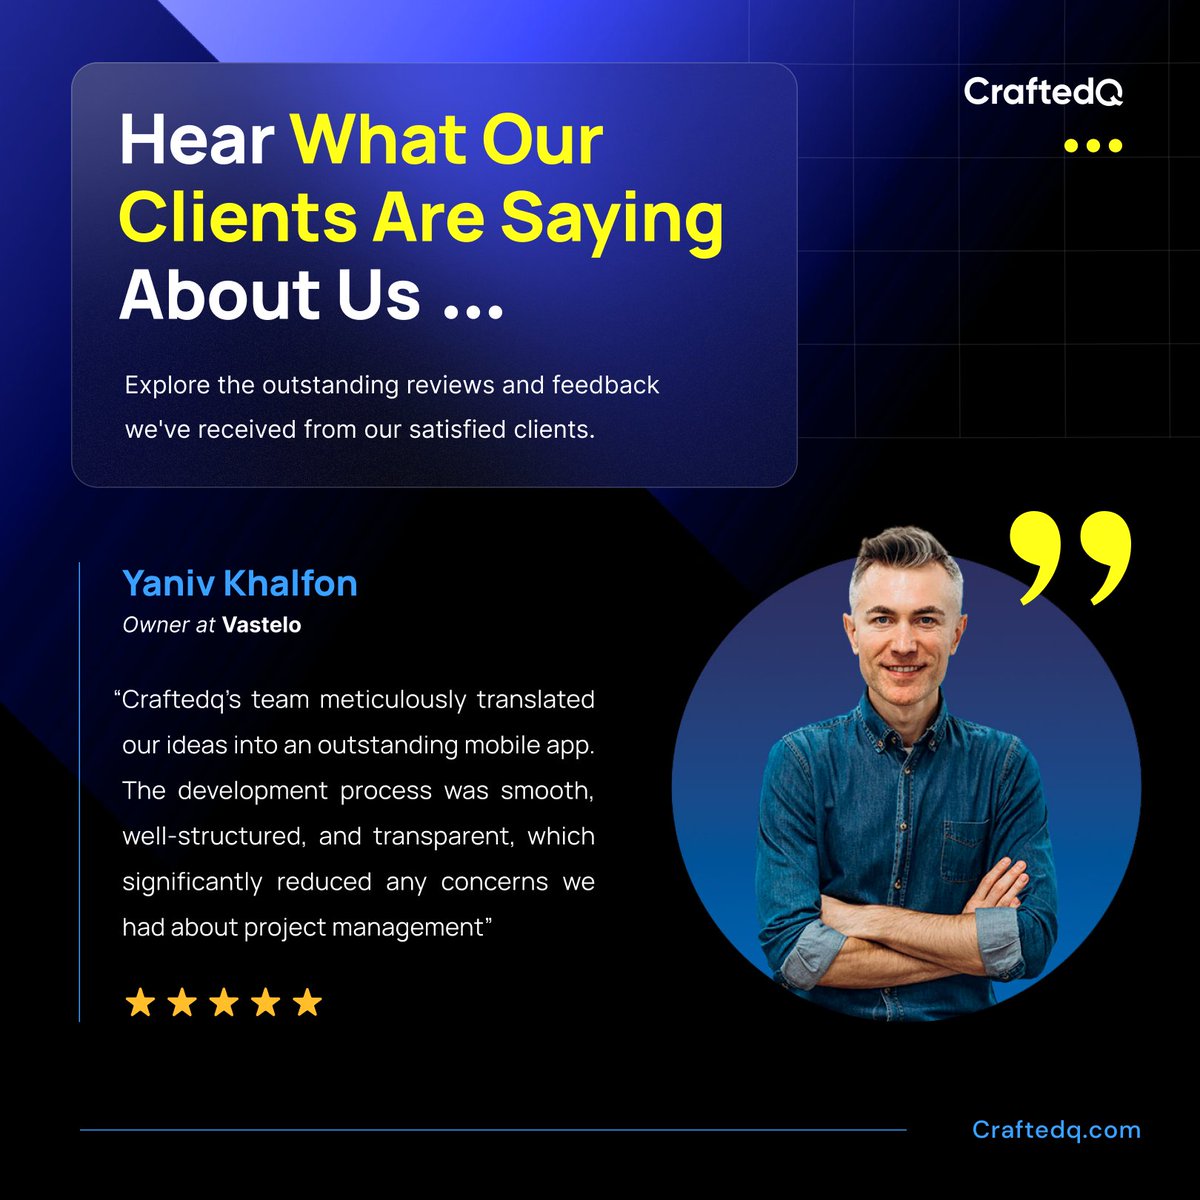 '🌐 Client Spotlight: Hear what our clients are saying about their experience with CraftedQ! Your success journey awaits. 🚀 #ClientTestimonials #Innovation'
Discover the impact #CraftedQ has had on businesses through the words of our clients. #ClientSuccess #InnovationJourney